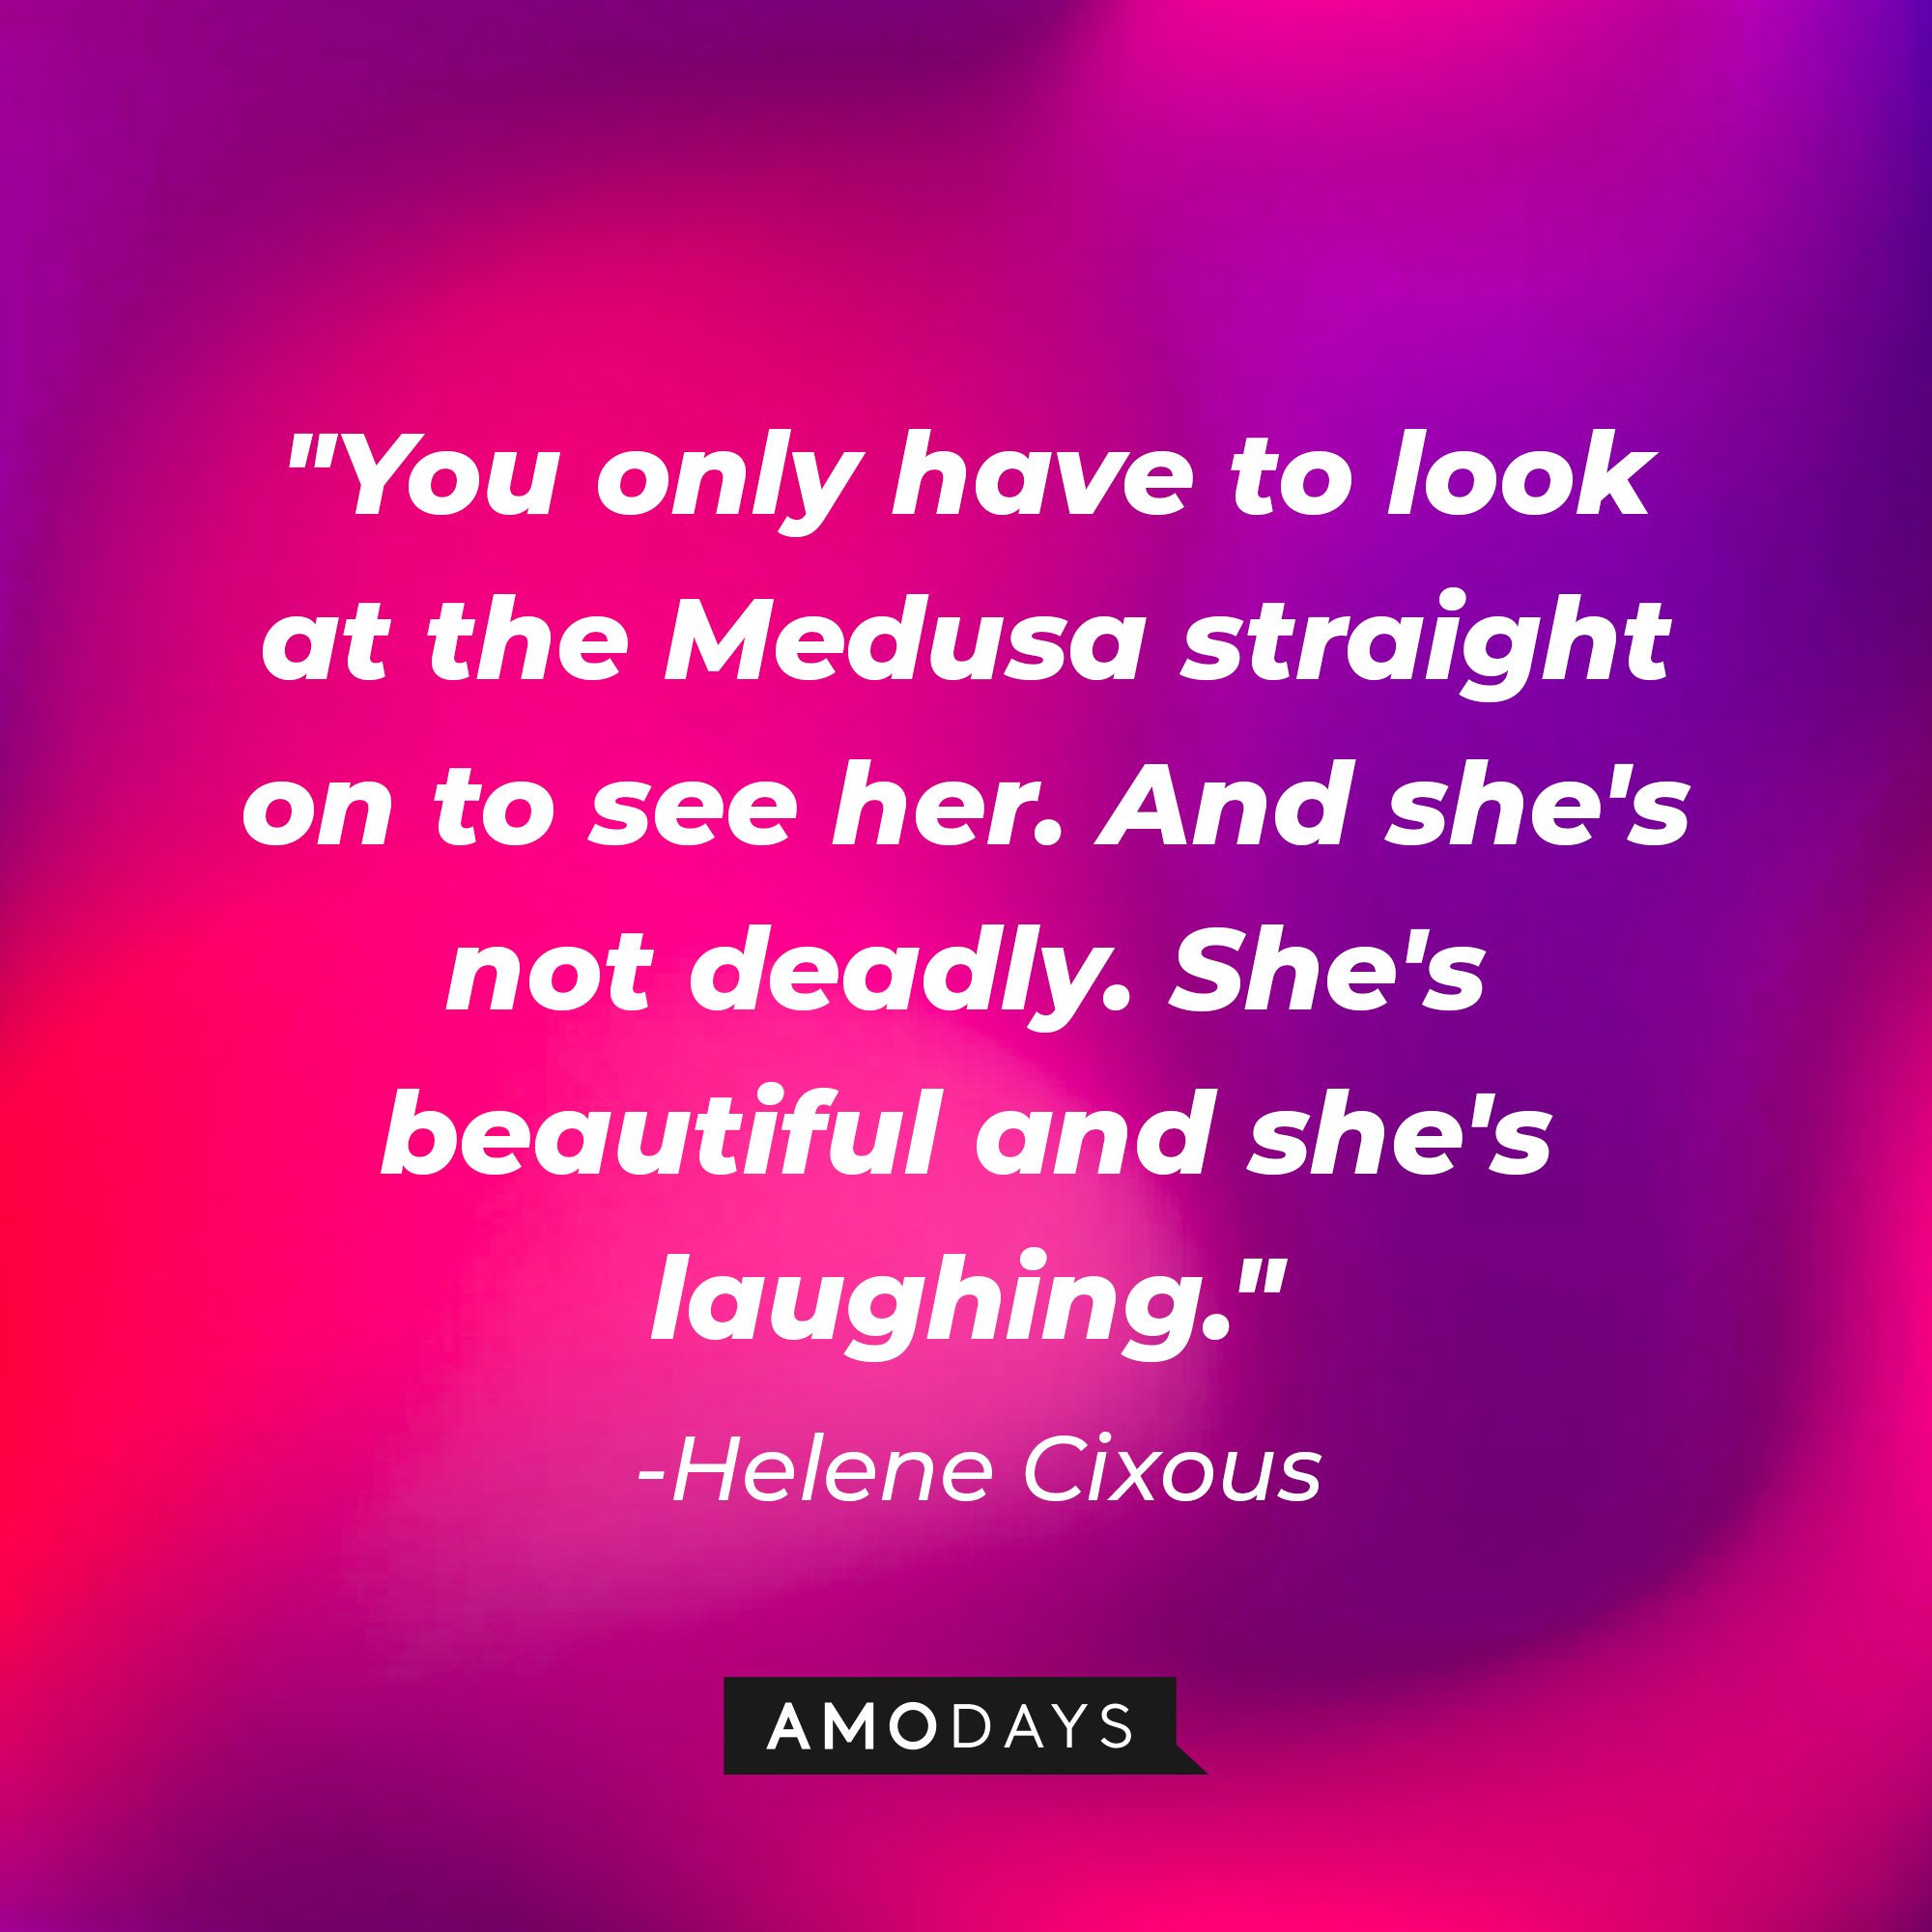  Helene Cixous’ quote: "You only have to look at the Medusa straight on to see her. And she's not deadly. She's beautiful, and she's laughing." | Image: AmoDays